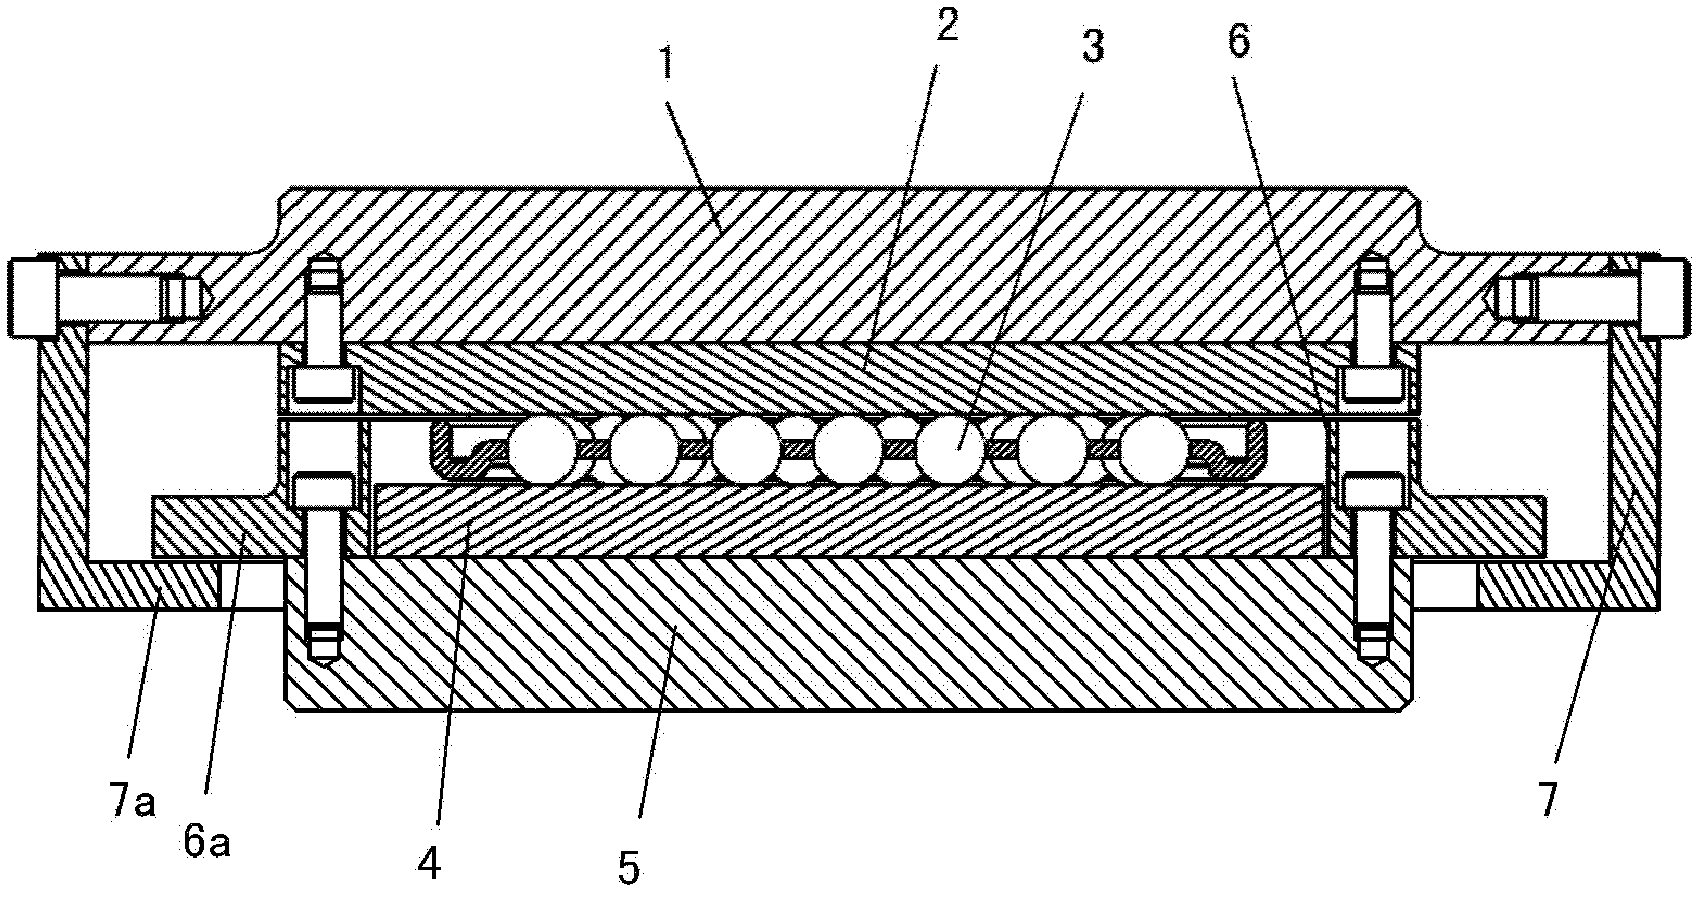 Sliding filling block for accurately positioning large part